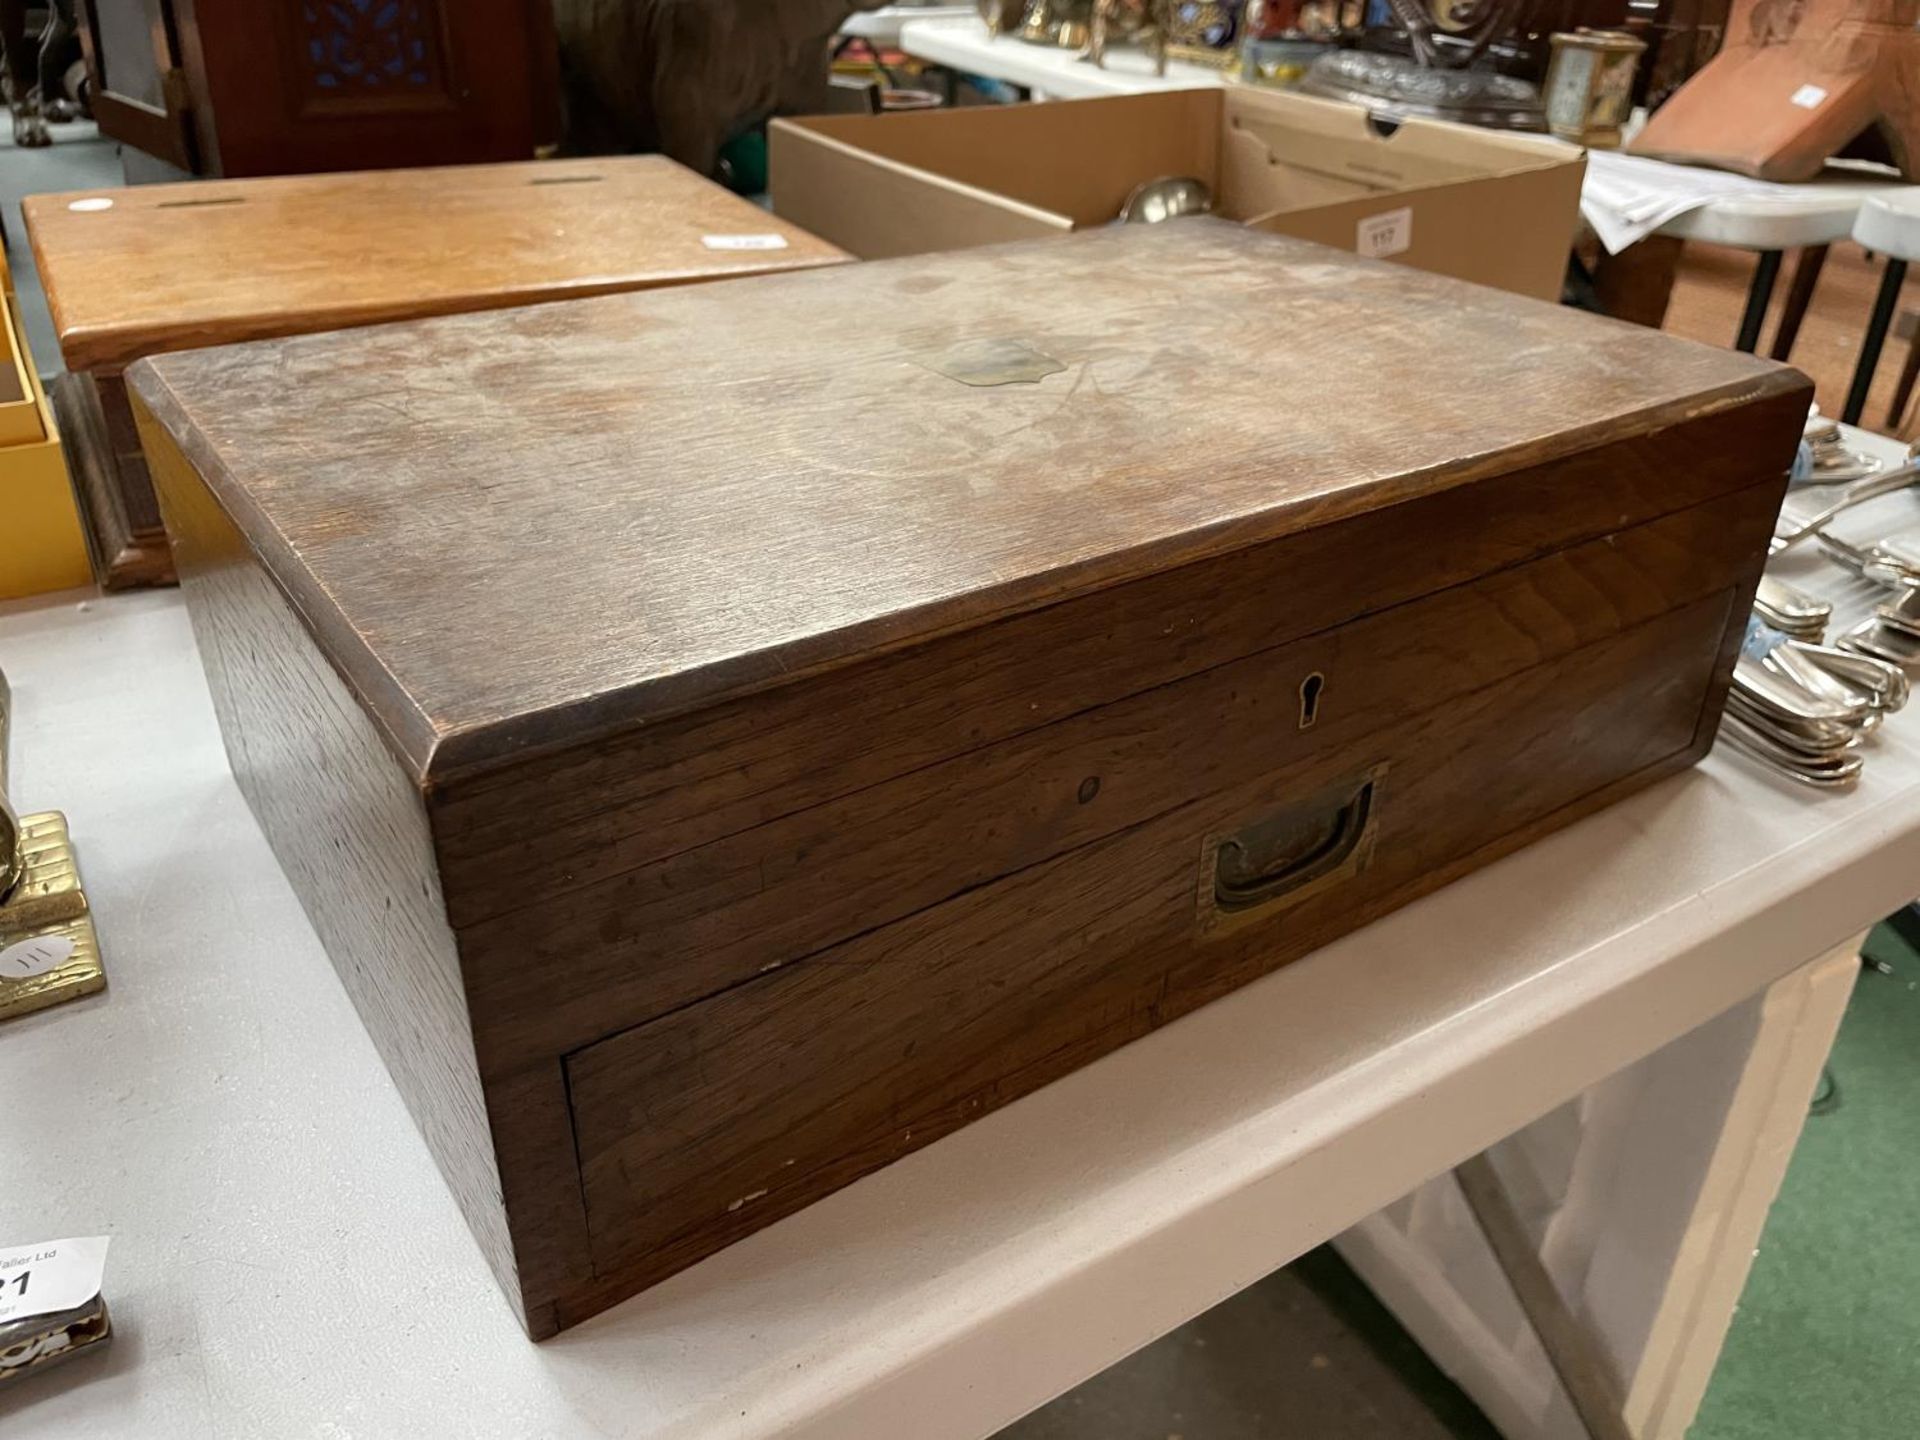 A LARGE OAK BOX WITH DRAW CONTAINING FRANK COBB & CO BONE HANDLED FLATWARE - Image 7 of 7